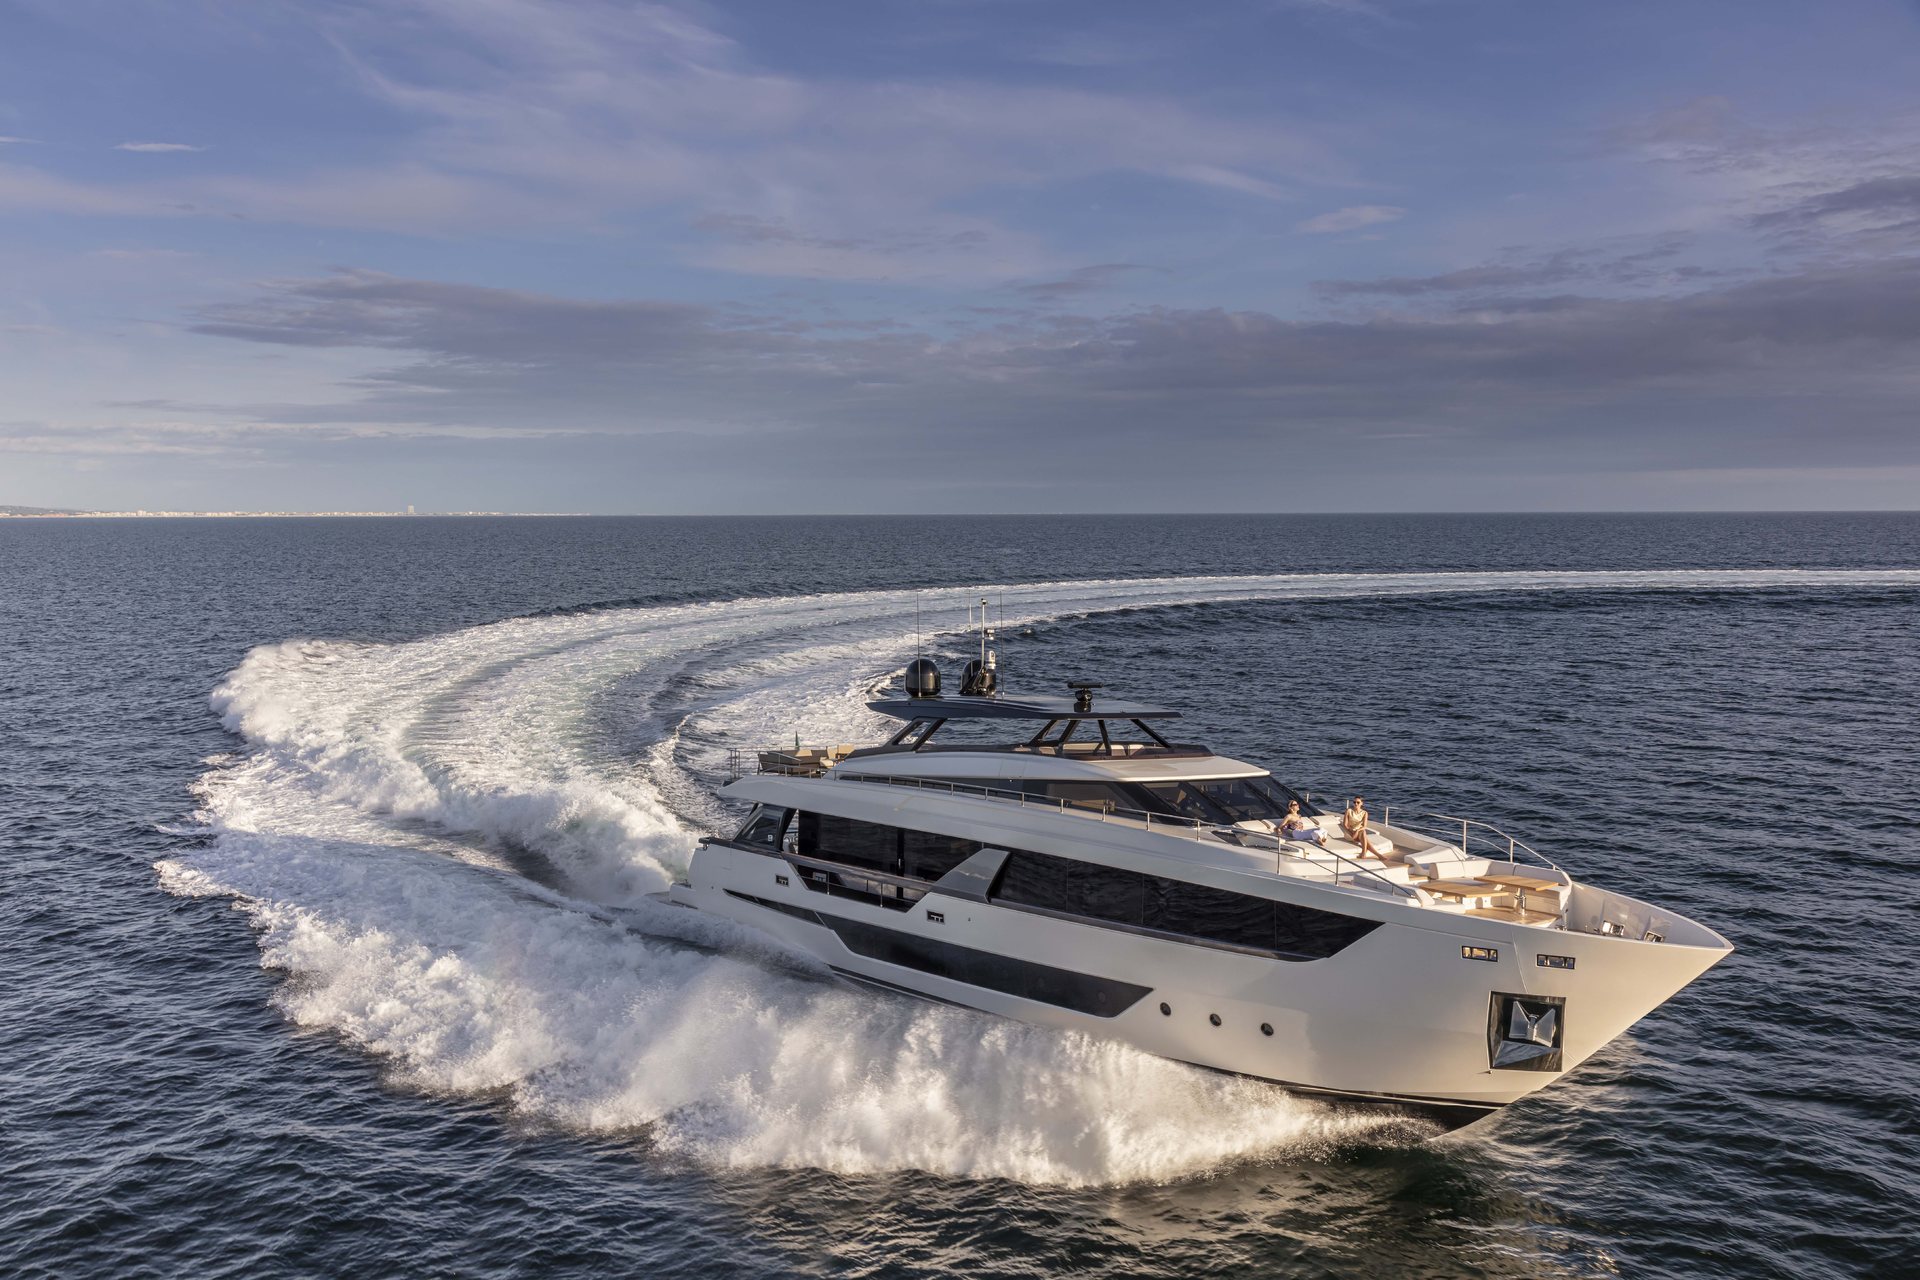 360 VR Virtual Tours of the Ferretti Yachts 1000